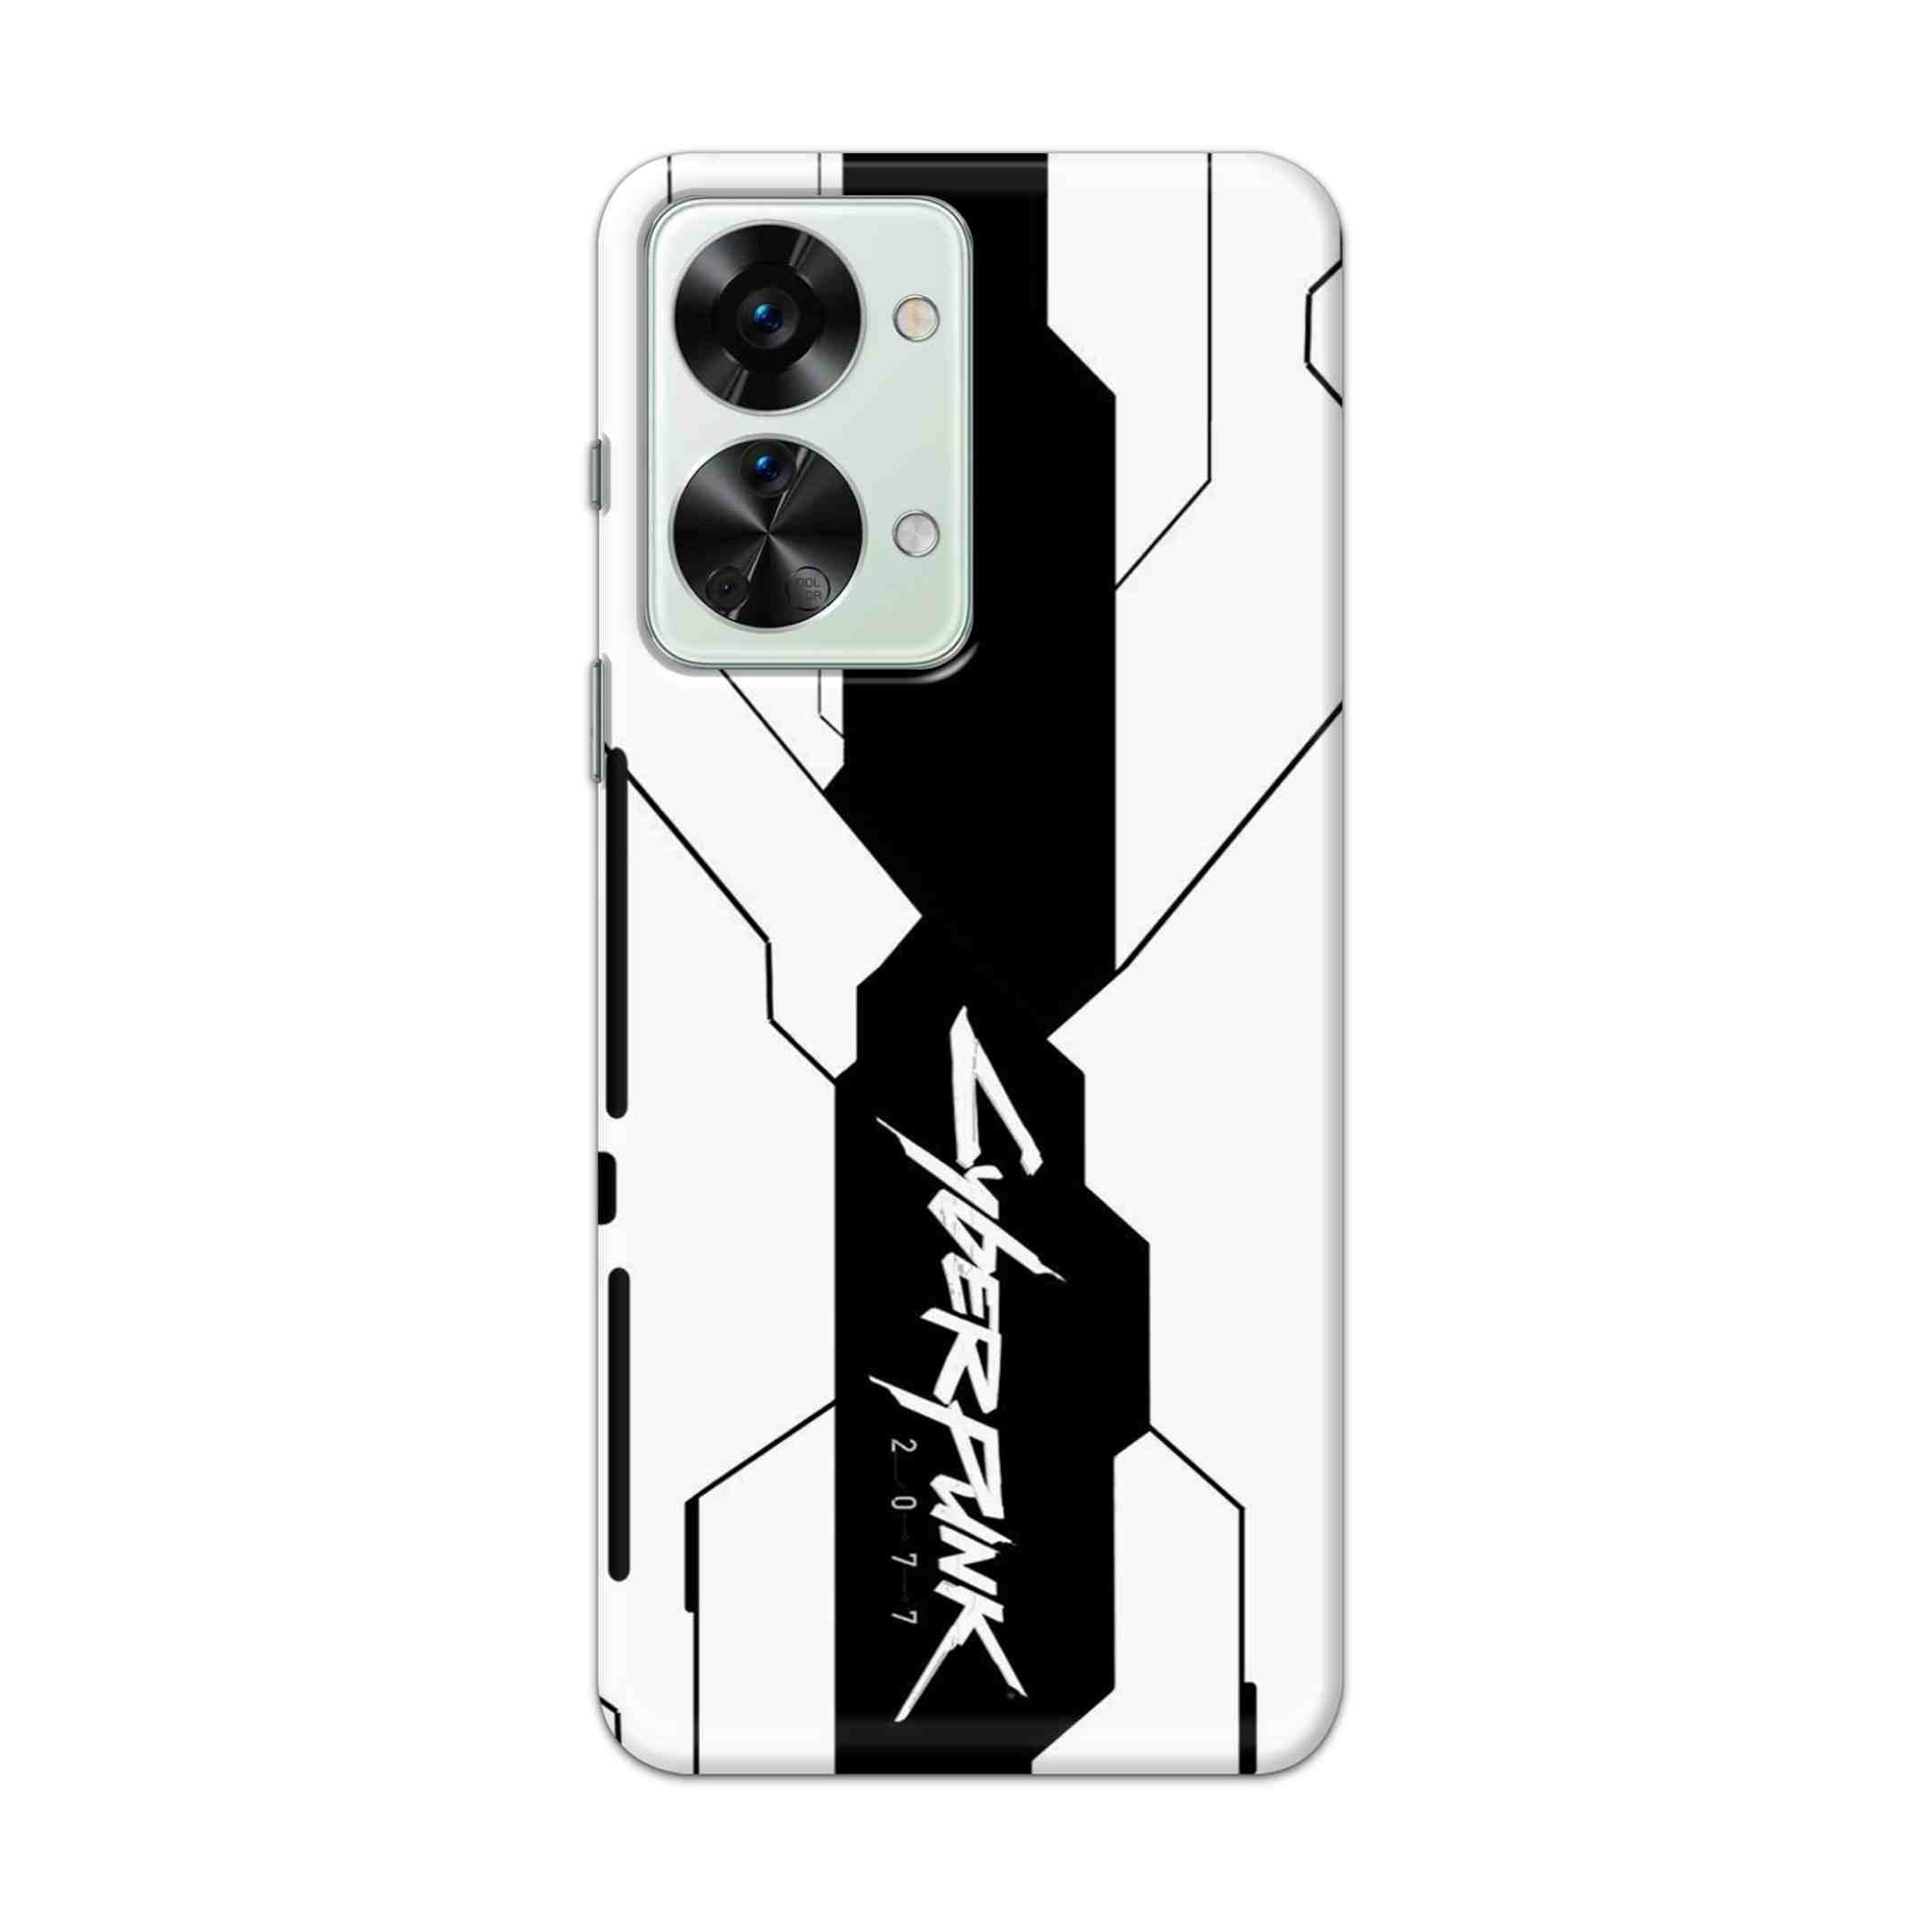 Buy Cyberpunk 2077 Hard Back Mobile Phone Case Cover For OnePlus Nord 2T 5G Online